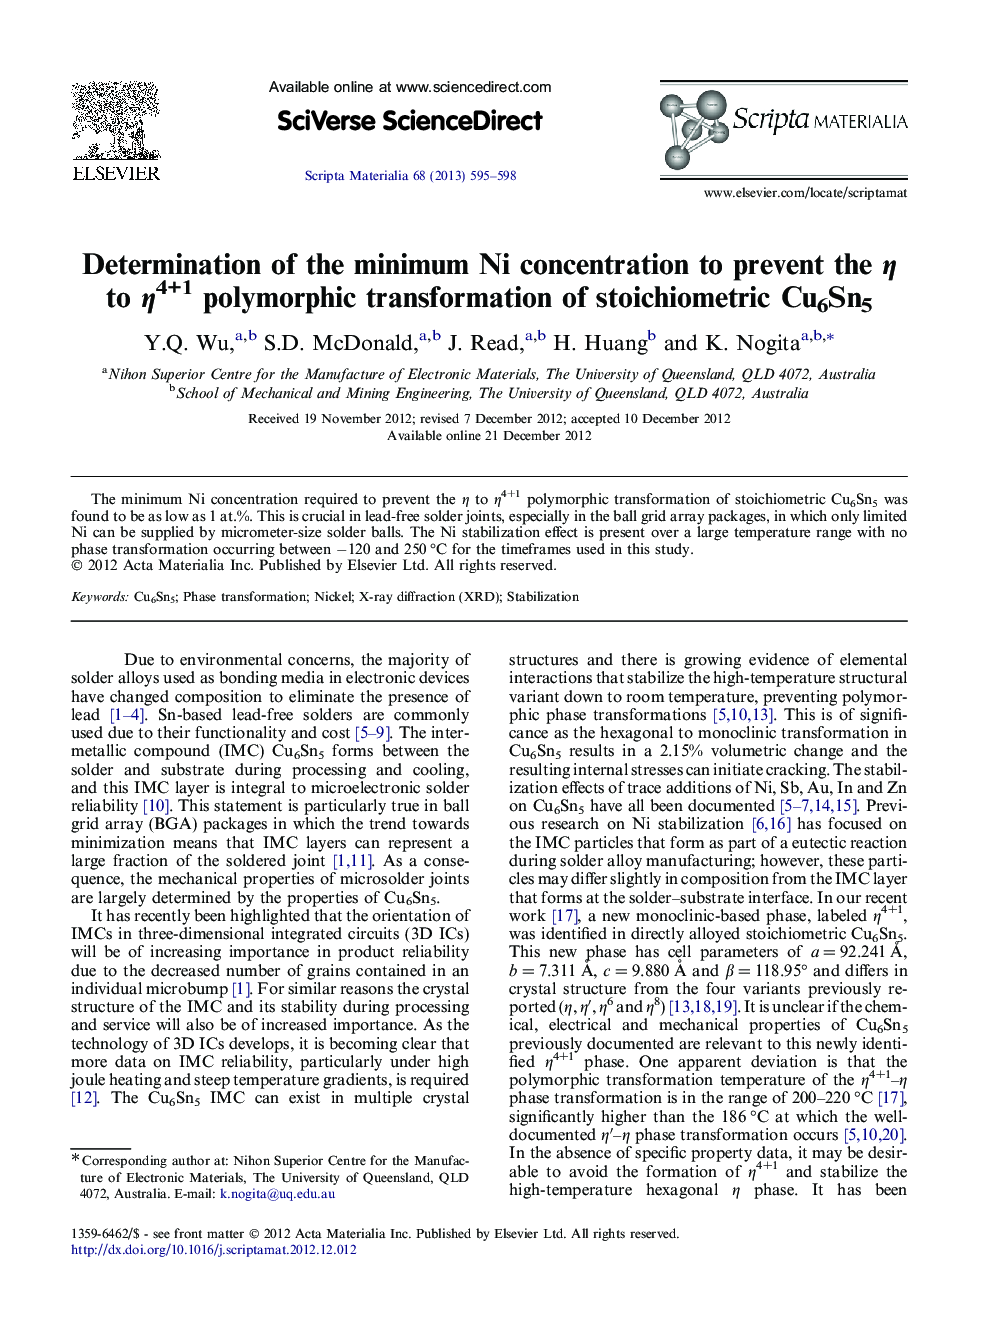 Determination of the minimum Ni concentration to prevent the η to η4+1 polymorphic transformation of stoichiometric Cu6Sn5